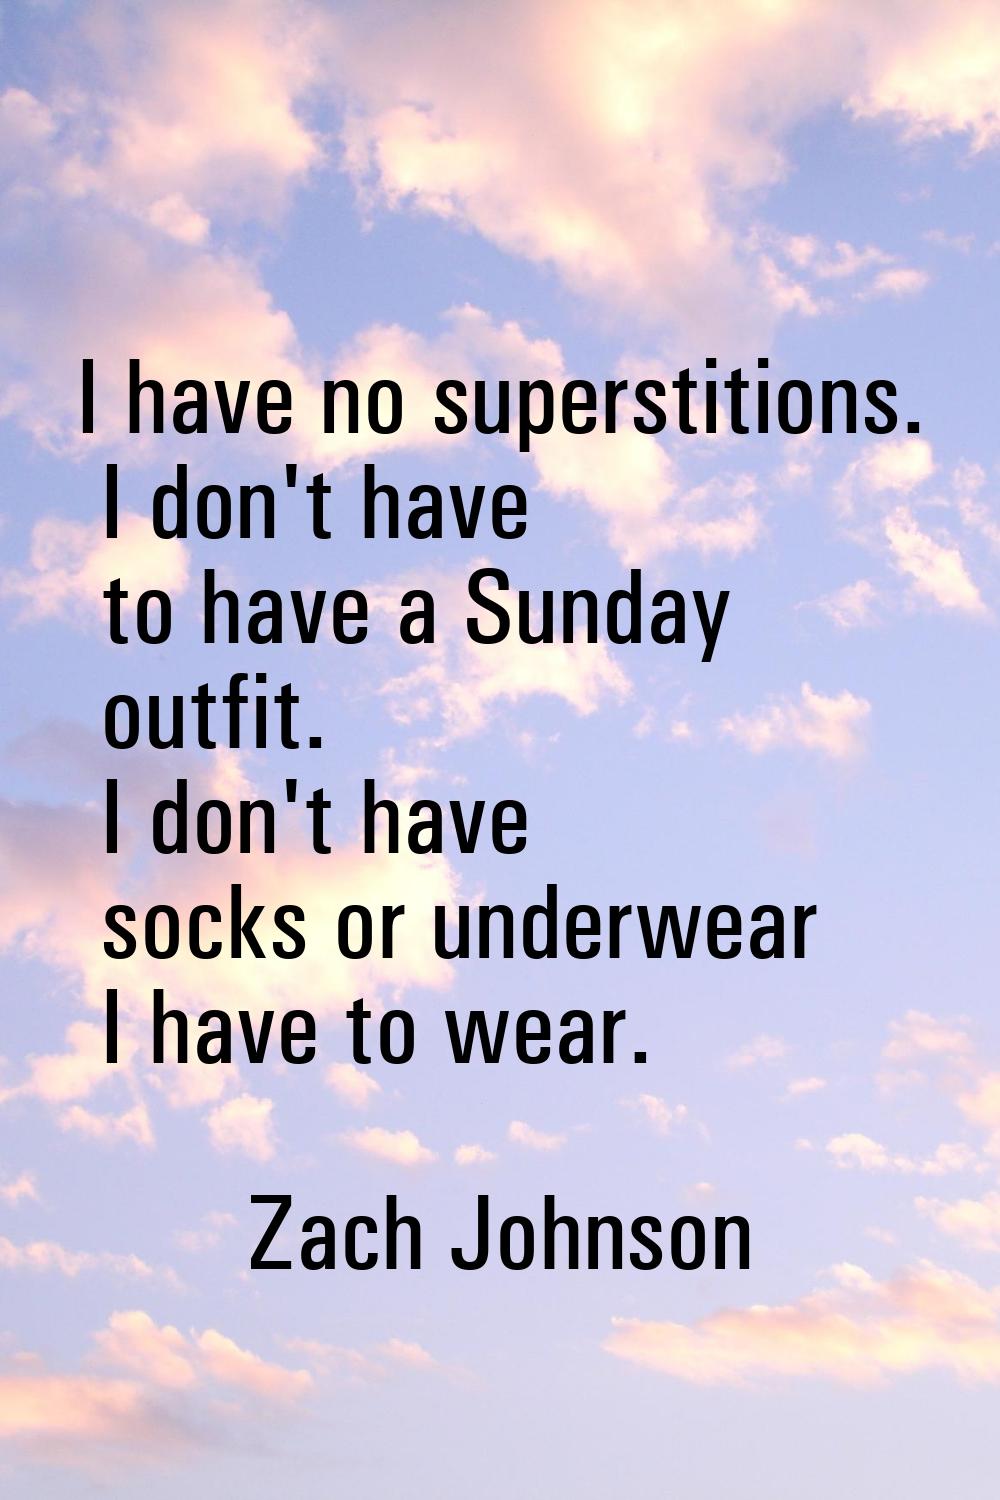 I have no superstitions. I don't have to have a Sunday outfit. I don't have socks or underwear I ha